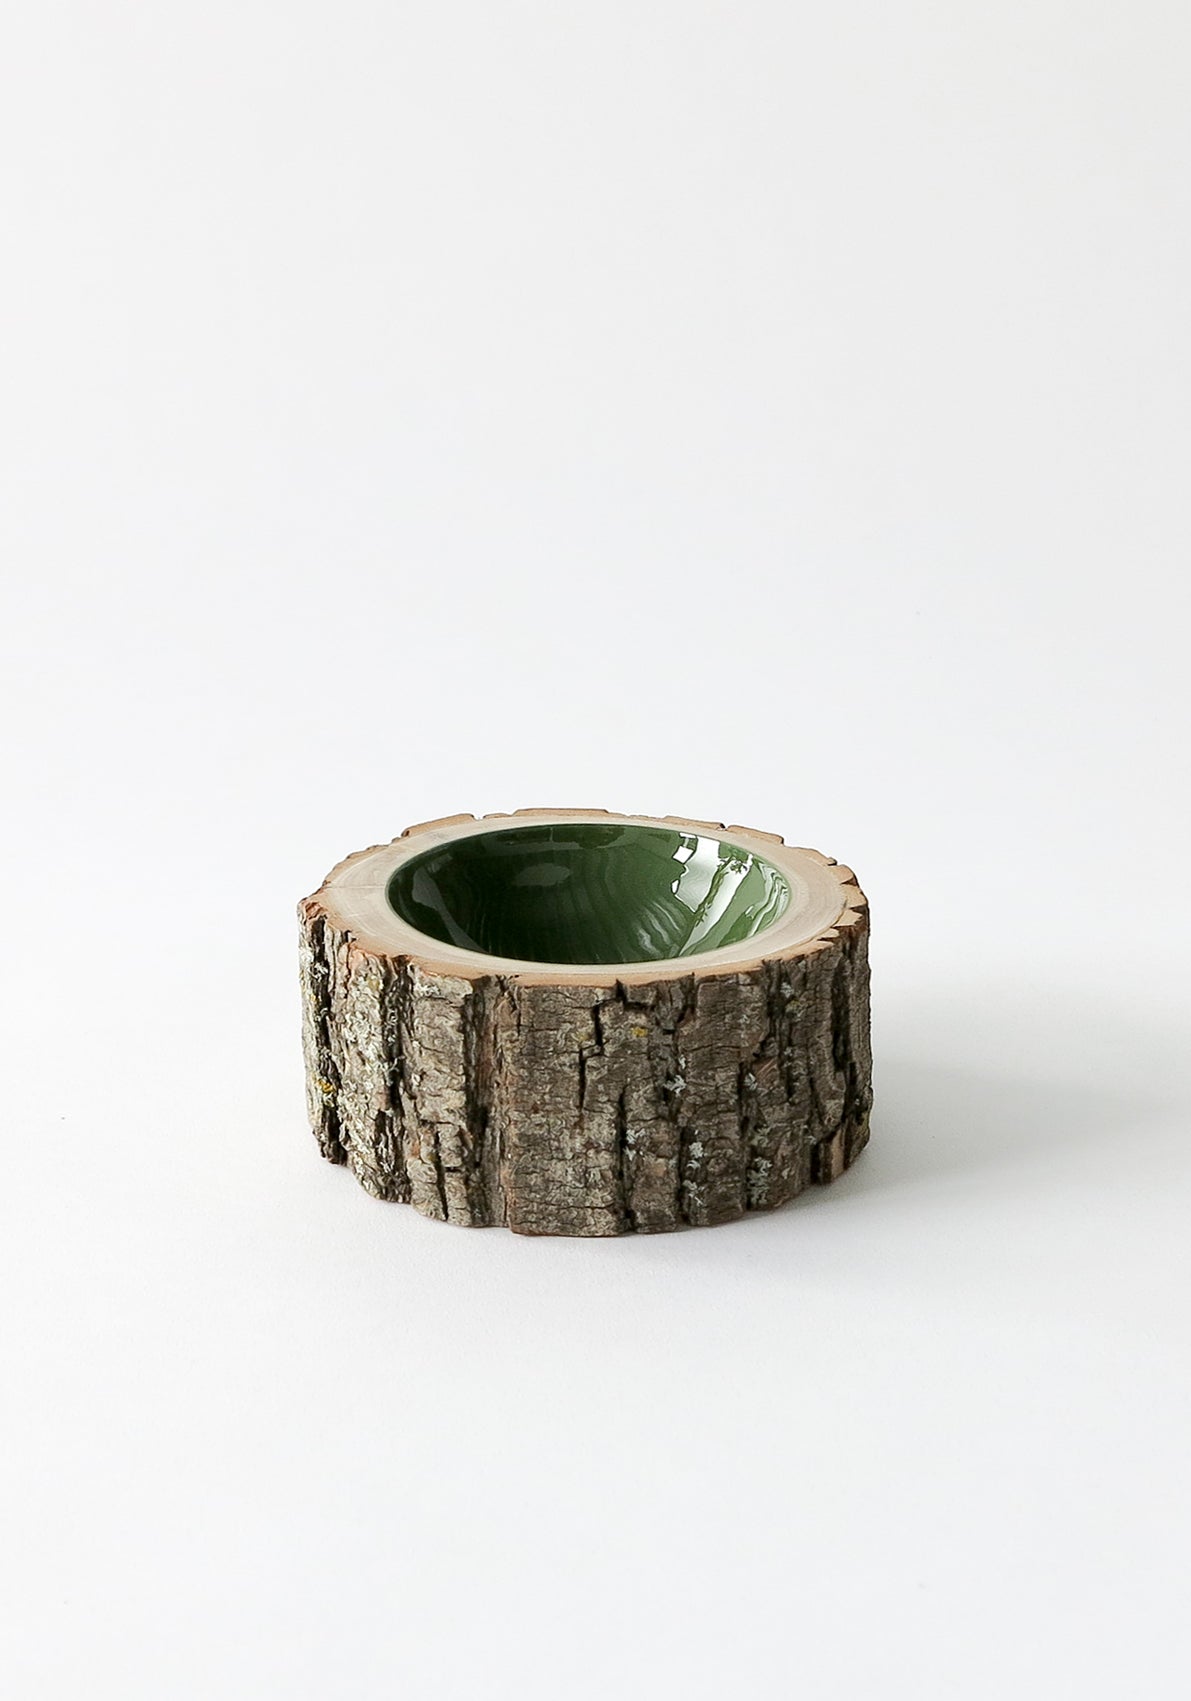 Size 5 Log Bowl - medium wooden bowl with rough bark, glossy interior is a rich olive green colour.